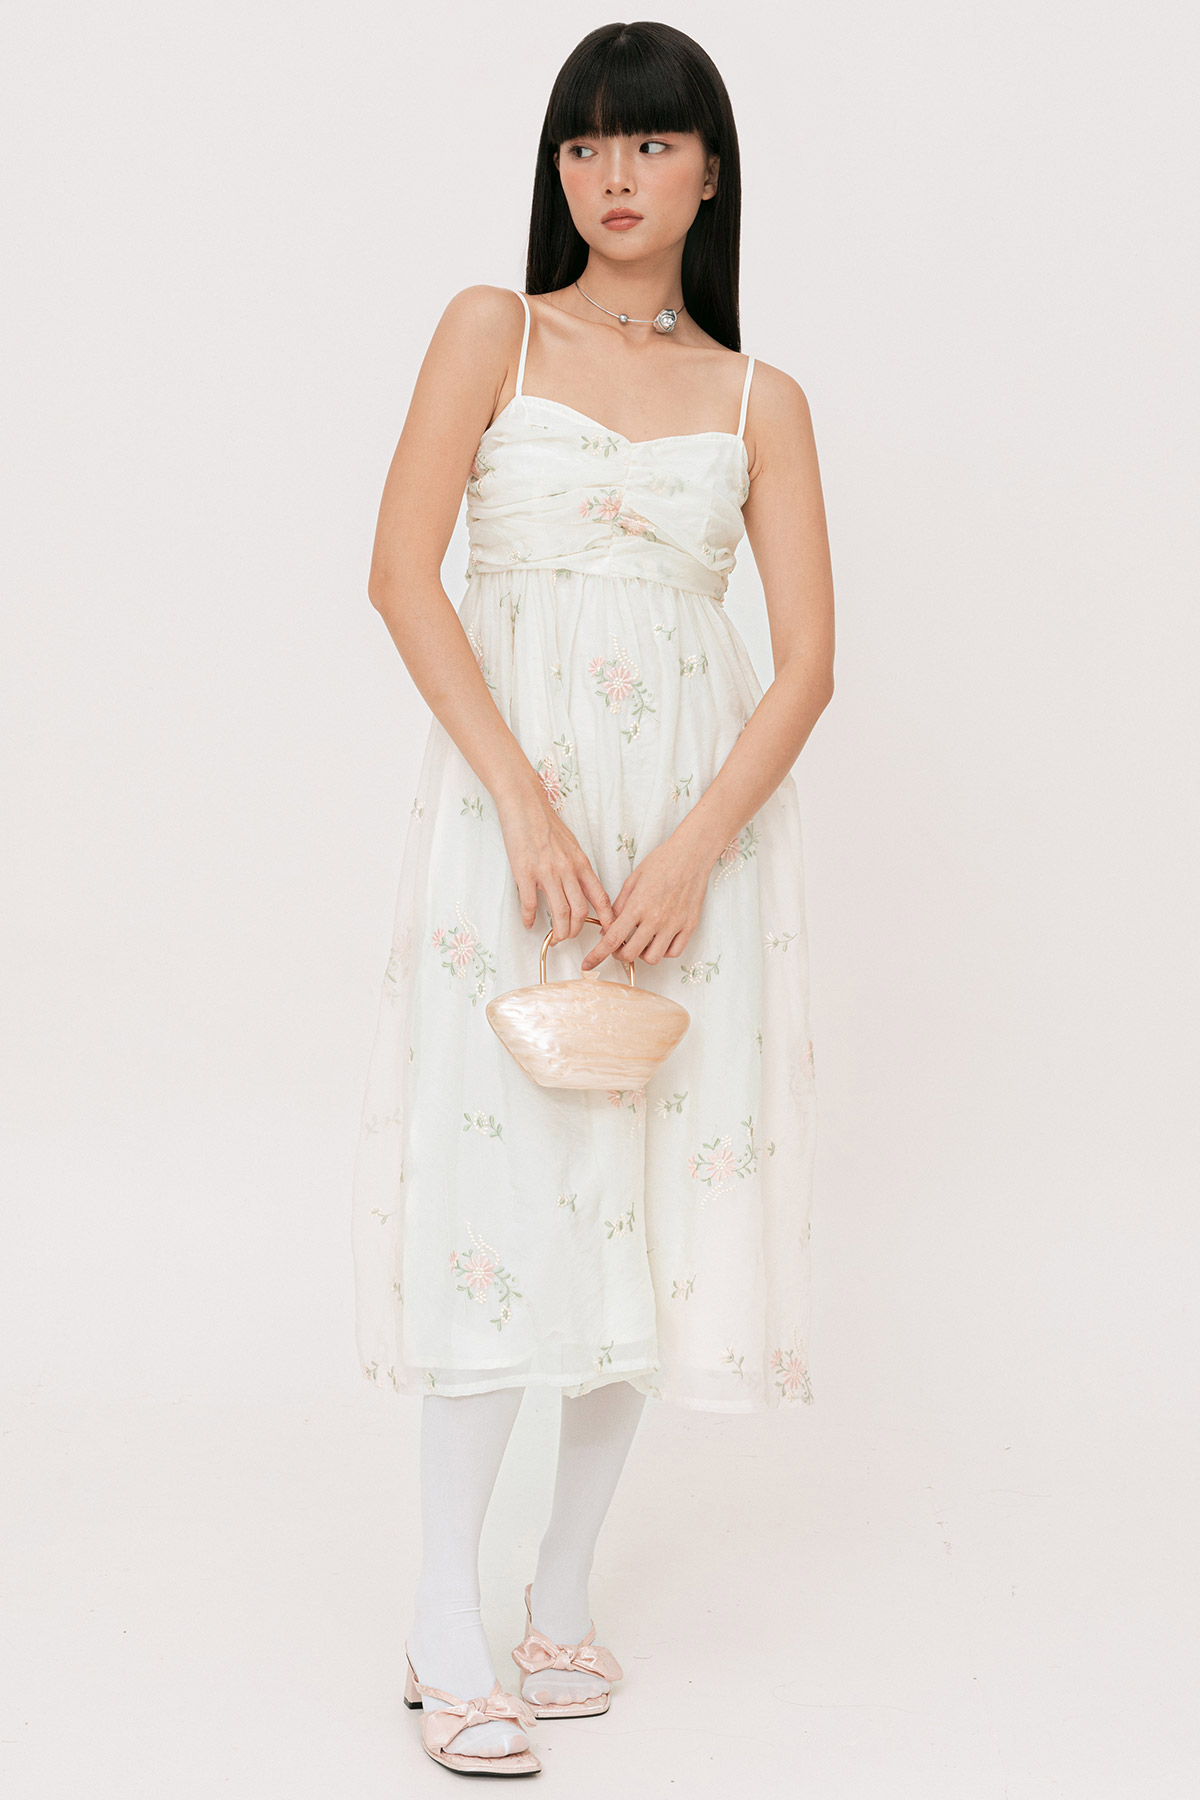 CLAUDETTE DRESS - SWEET PEA [BY MODPARADE]